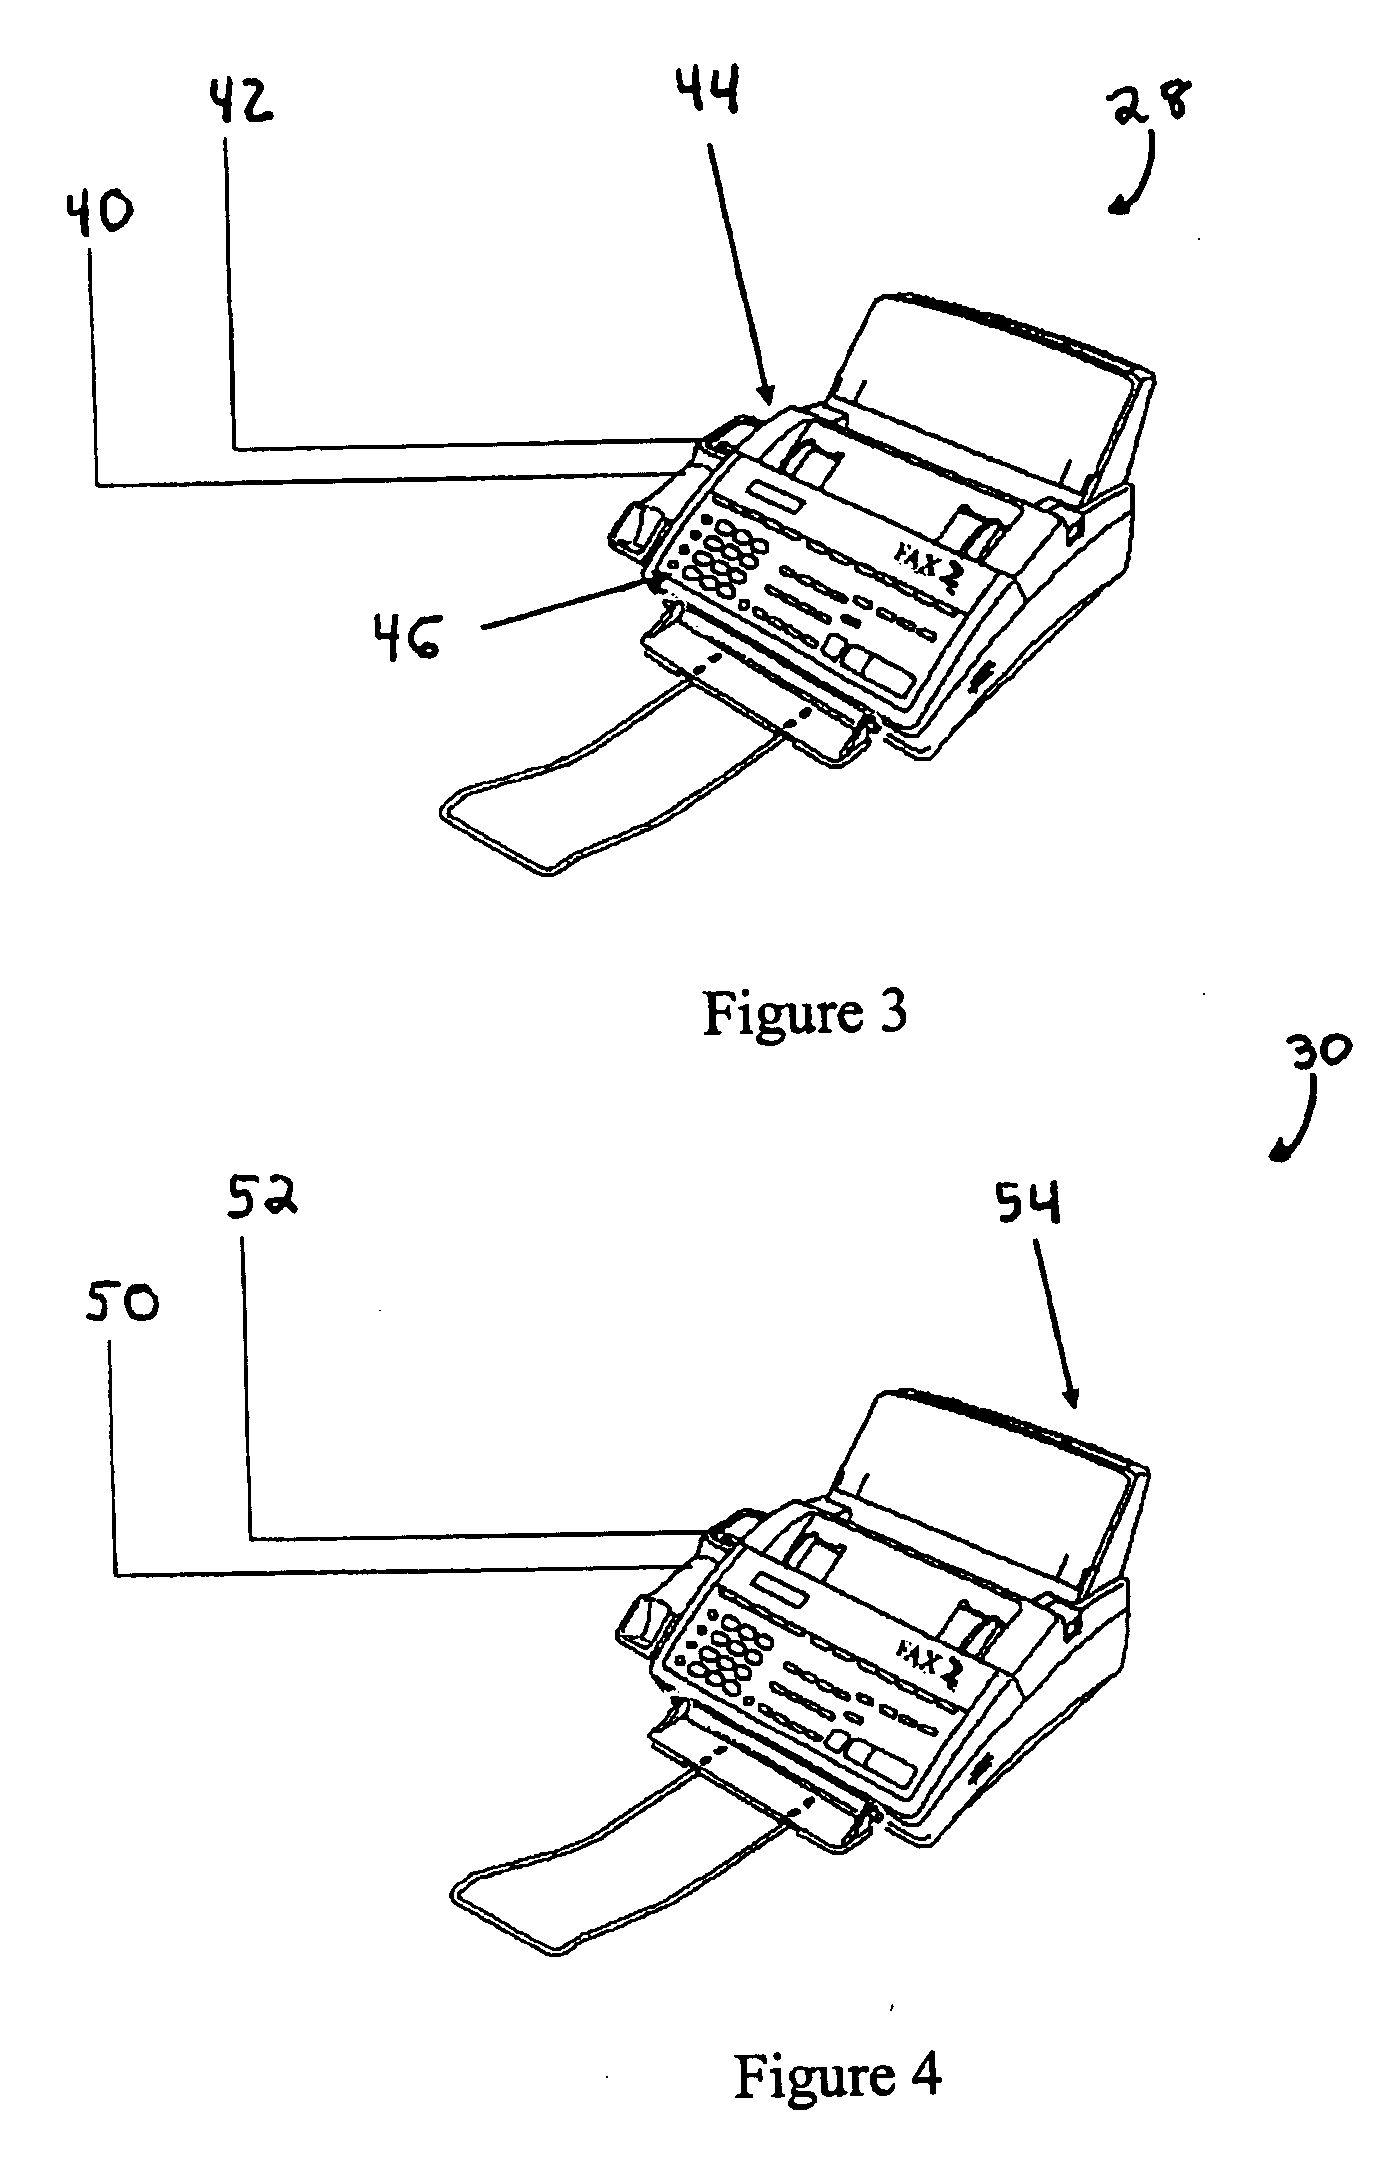 Universal document exchange system and method